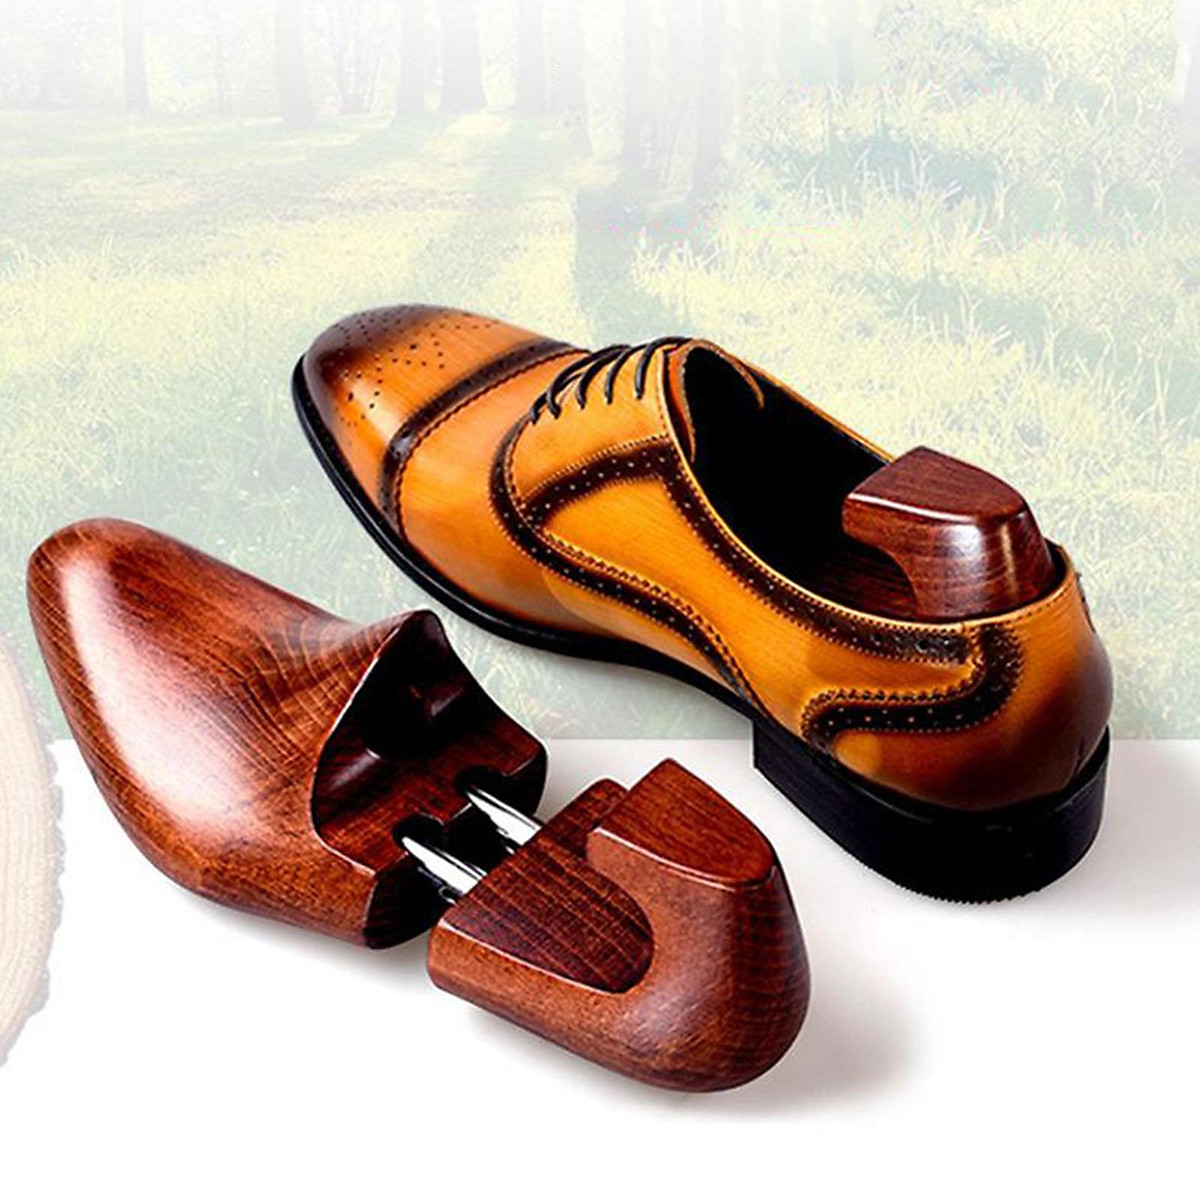 Adjustable Shoe Tree for Men Women , Durable Wooden Shoes Stretcher Shaper Boots  Tree Shoes Care Tool